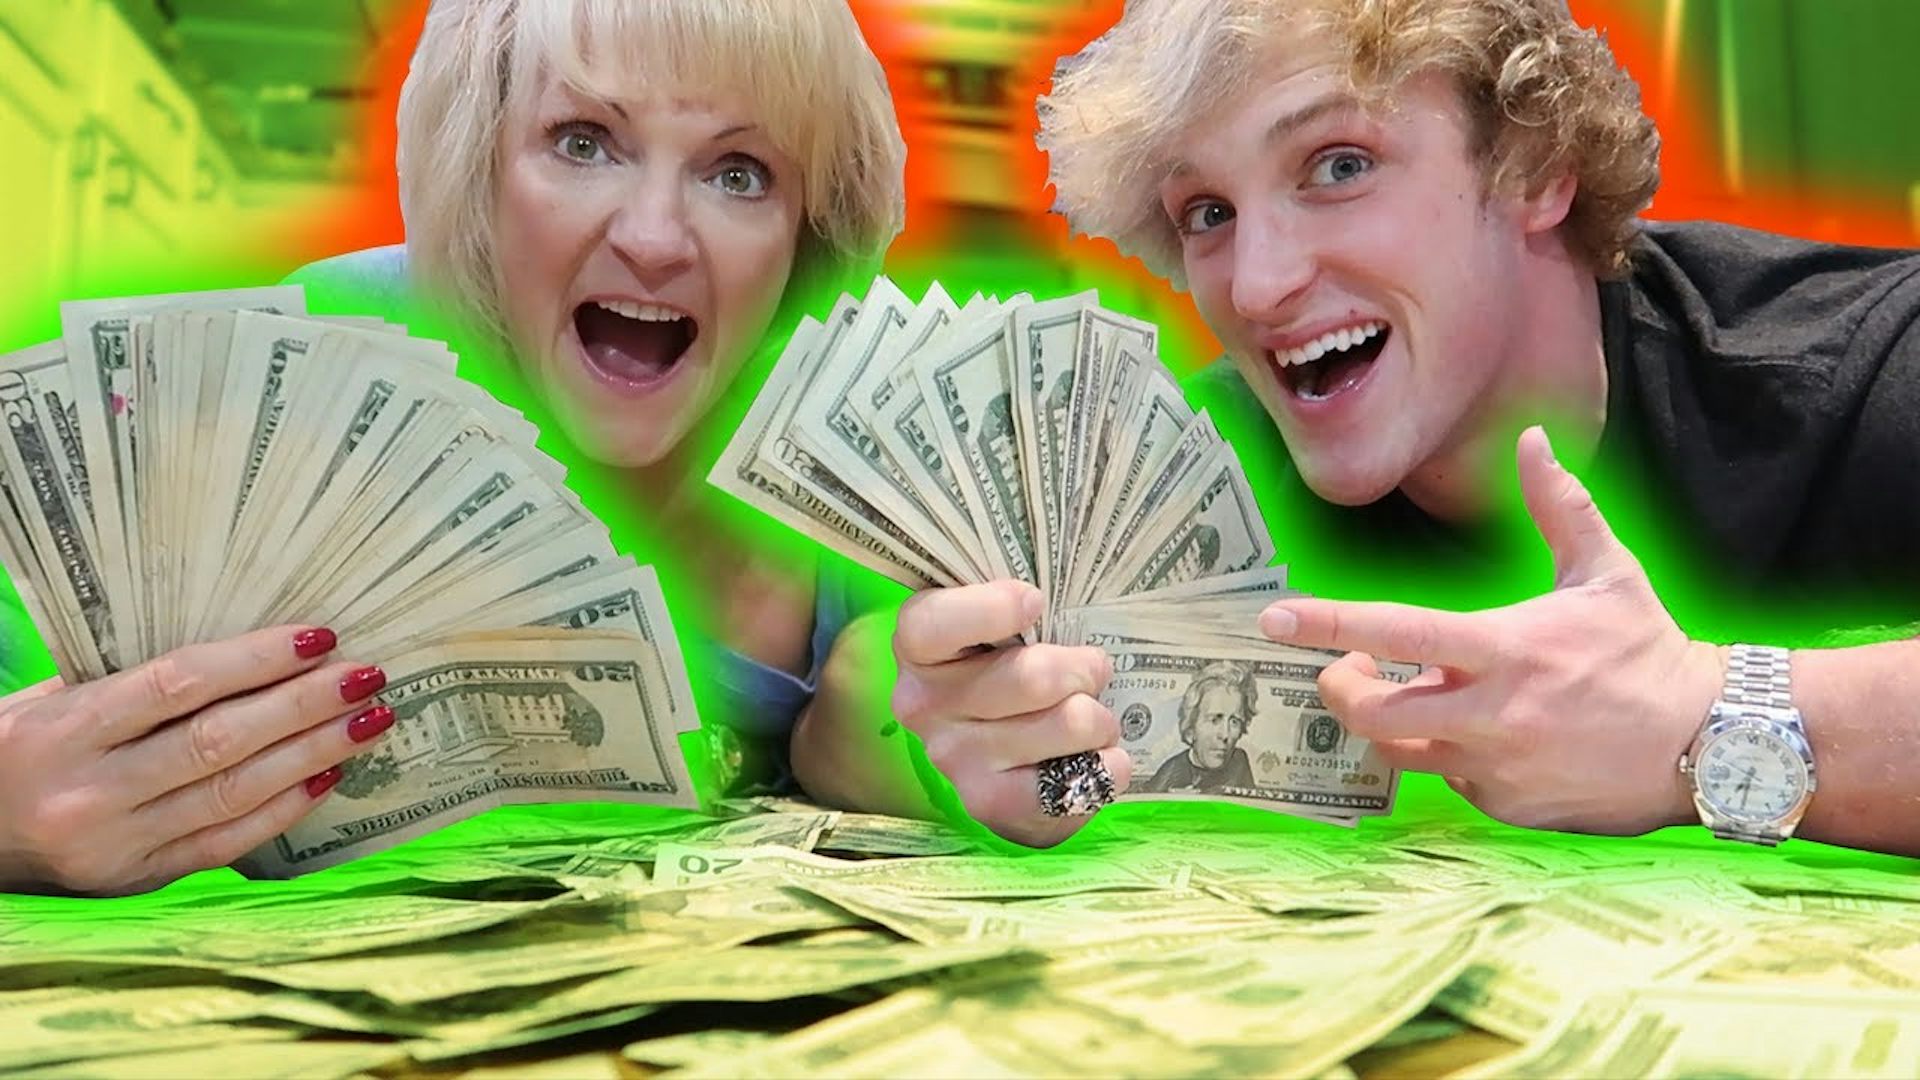 do famous youtubers make alot of money